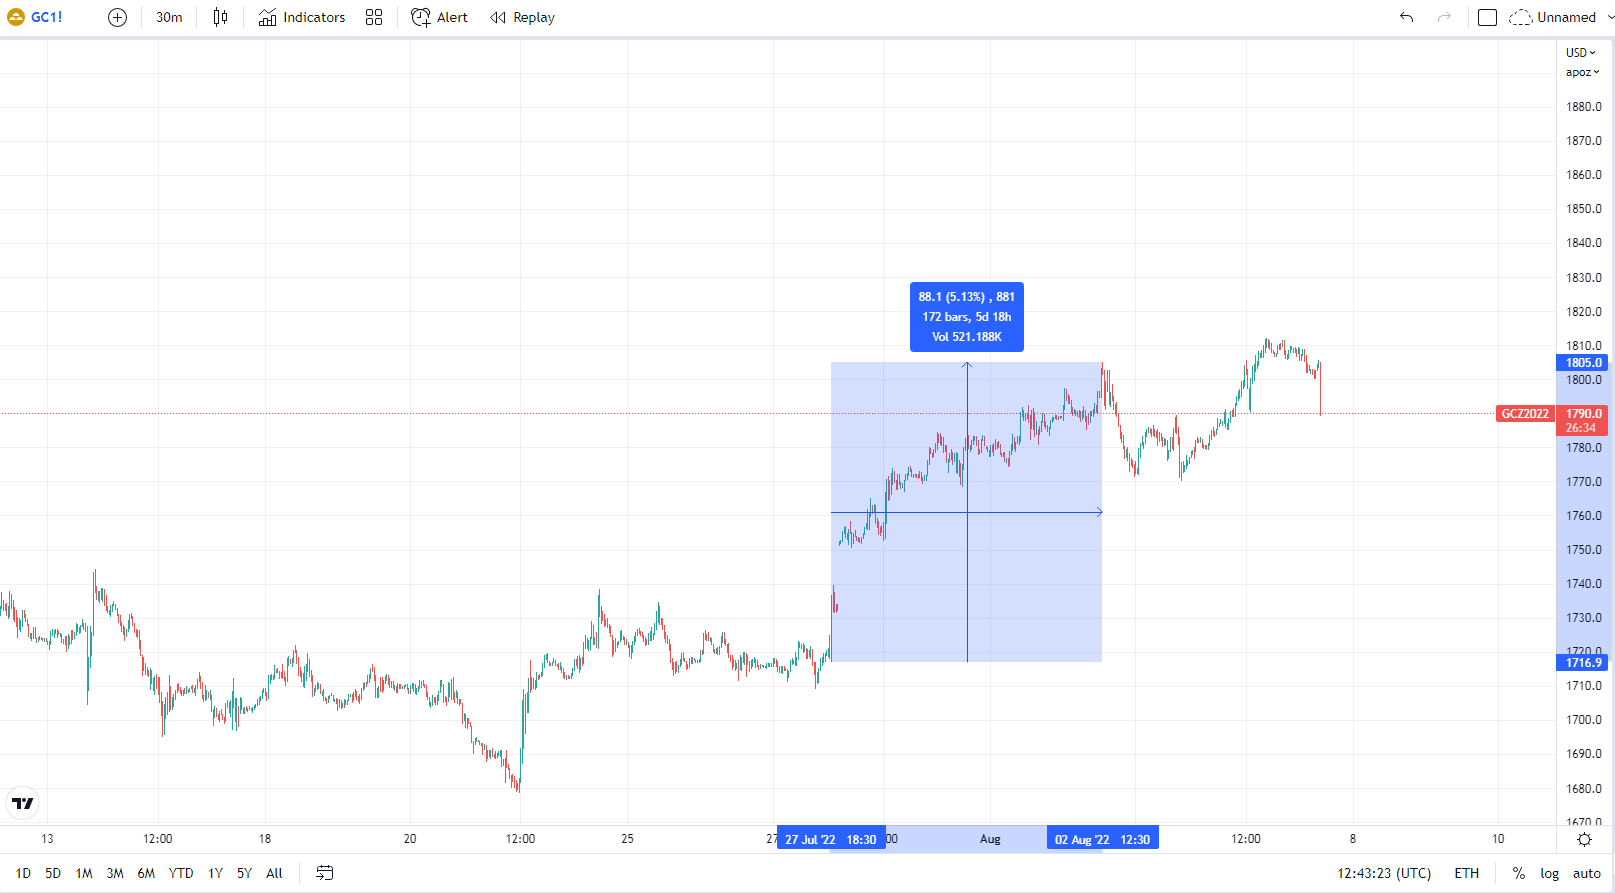 30 minutes chart of GC (Gold Futures), Price move after Fed meeting. Source: tradingview.com